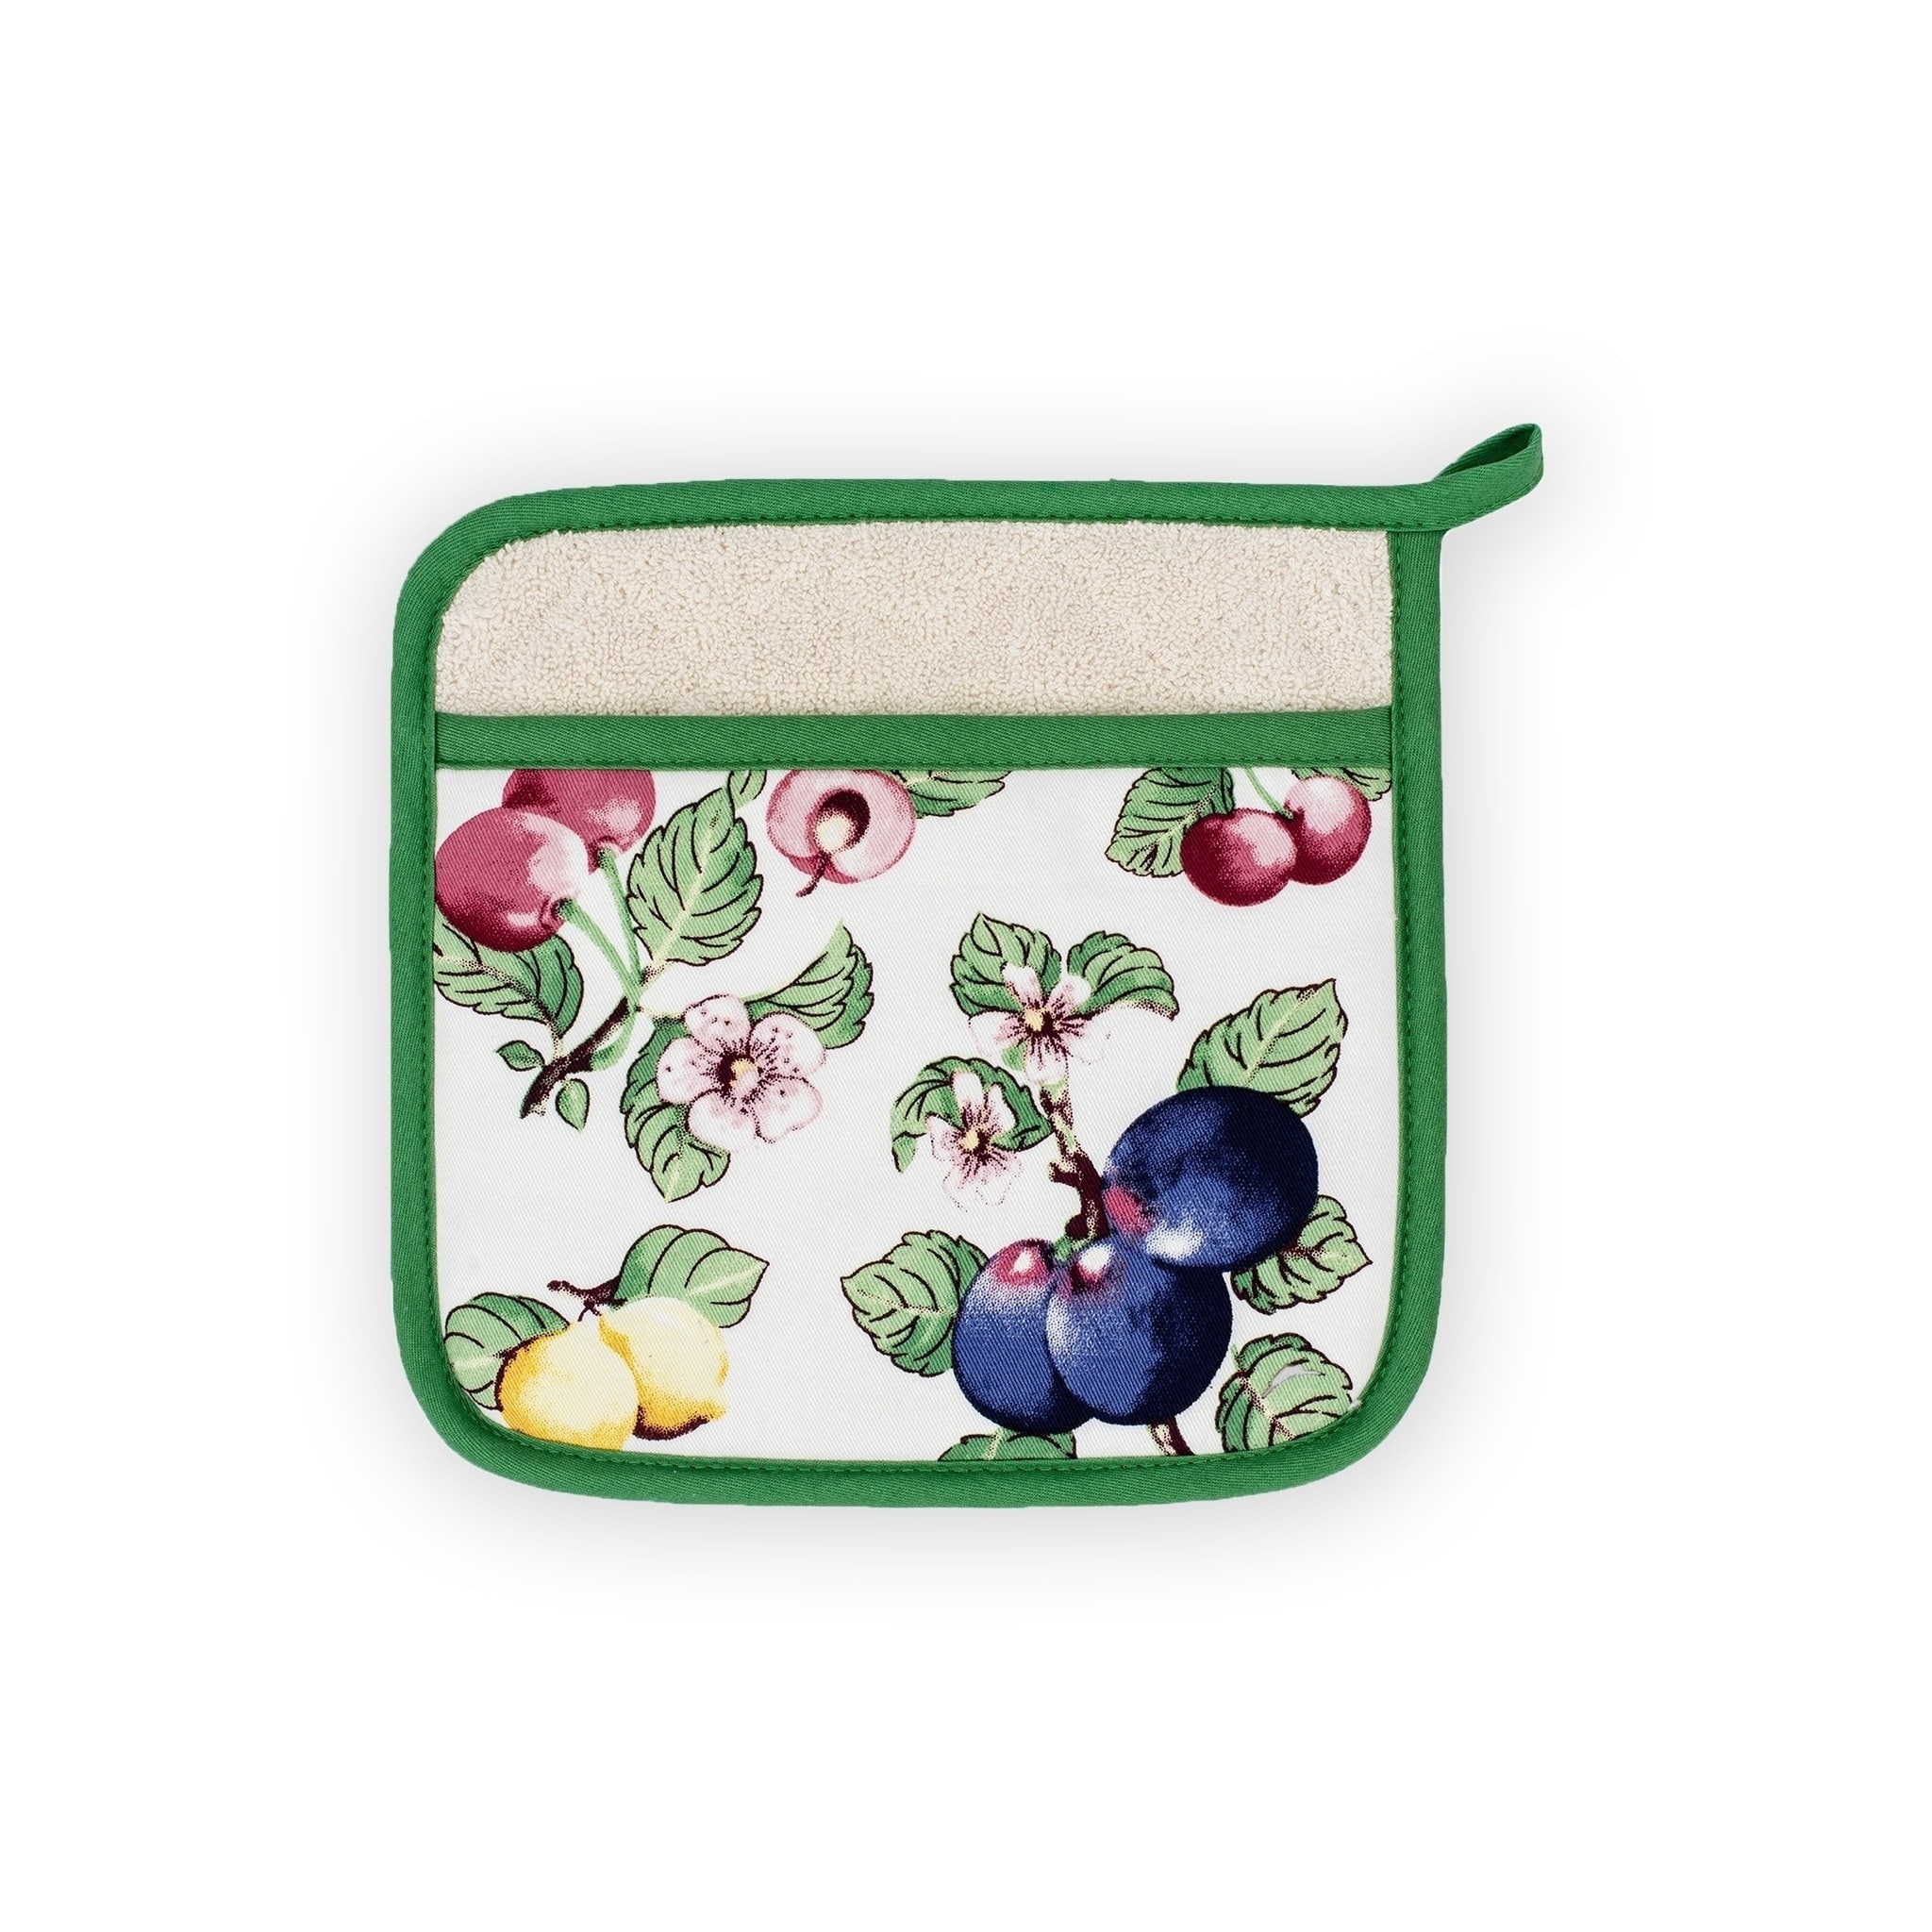 https://ak1.ostkcdn.com/images/products/is/images/direct/be079b32fcb2cd2d09a042172e6177113db7fcdd/Villeroy-and-Boch-French-Garden-Kitchen-Pot-Holder.jpg